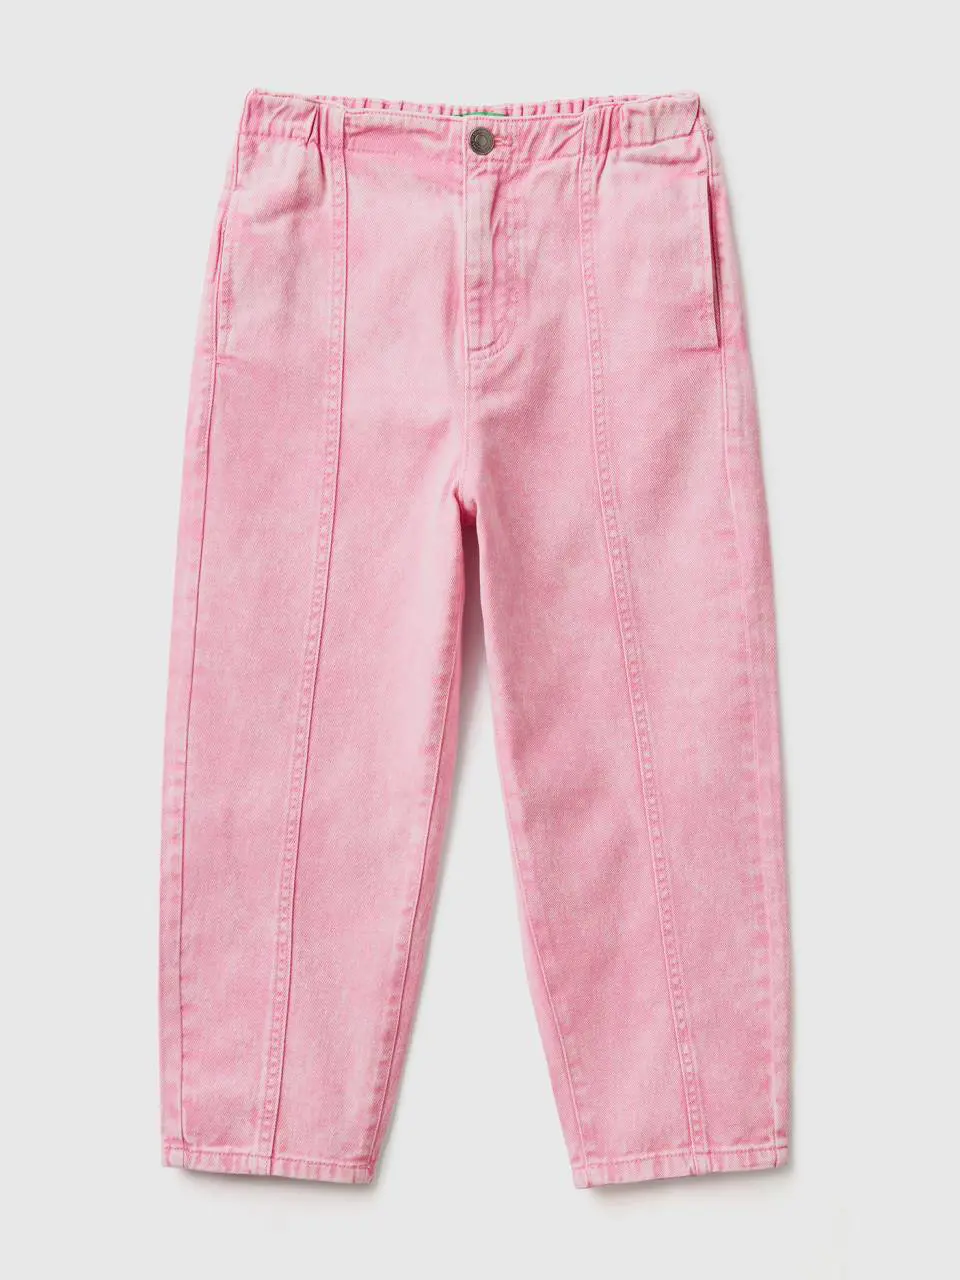 Benetton paperbag trousers in 100% cotton. 1